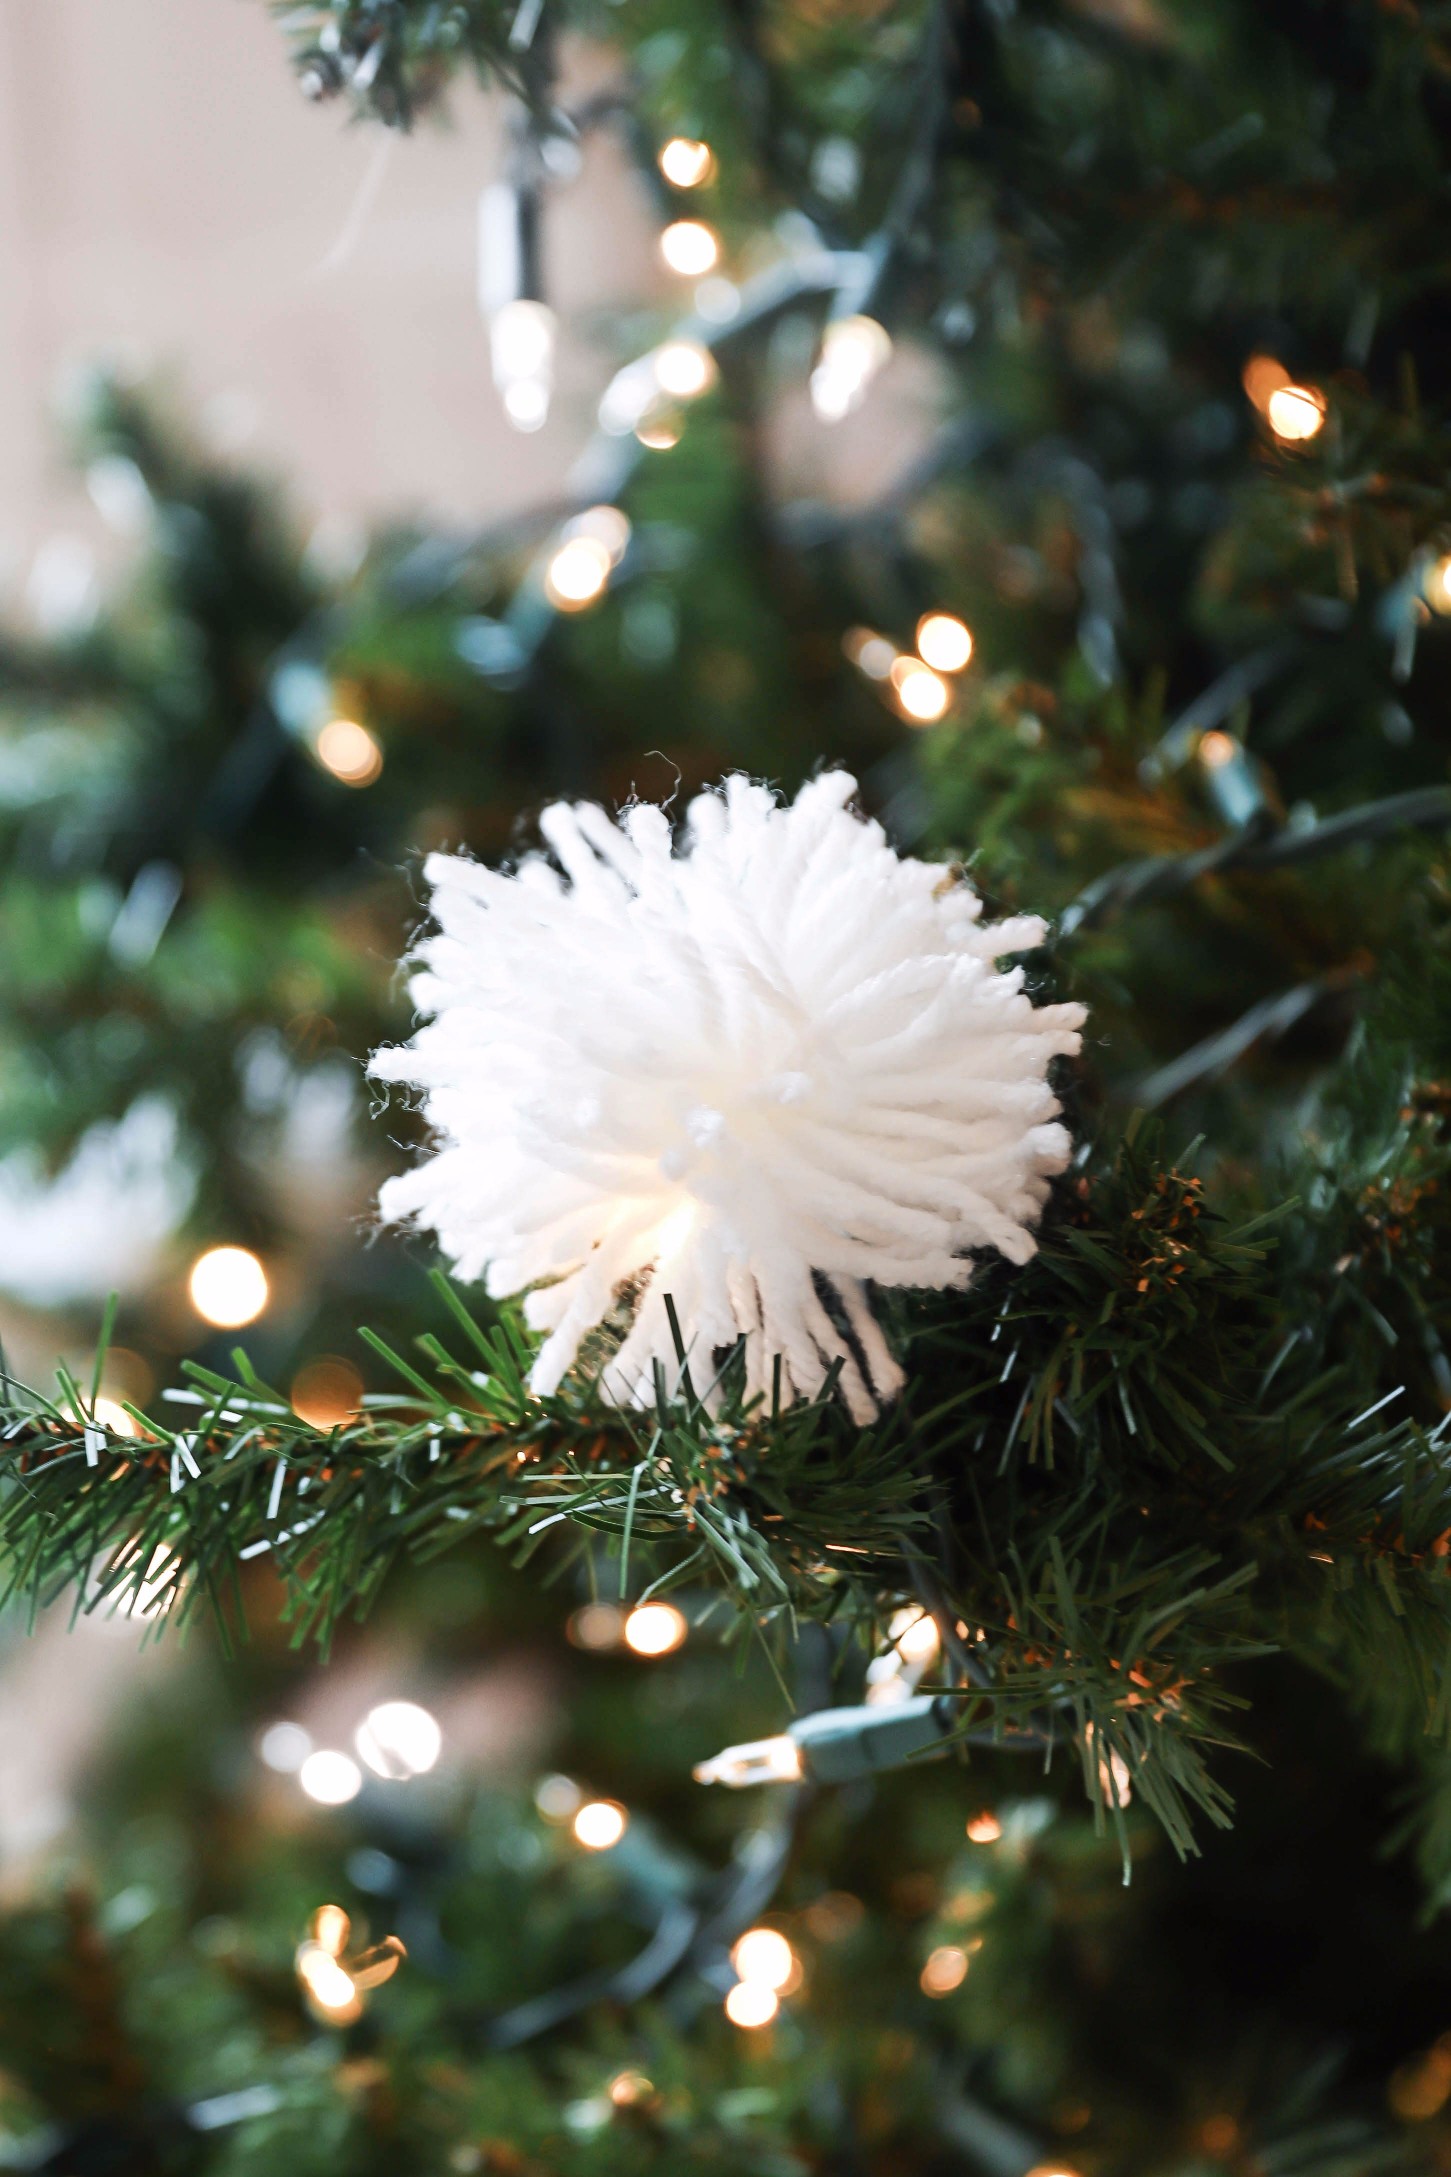 Holiday DIY decor! Learn how to make DIY snowball ornaments, tassel ornaments, pom pom ornaments, pom pom pillows, and pom pom garlands! Details on daily dose of charm lauren lindmark